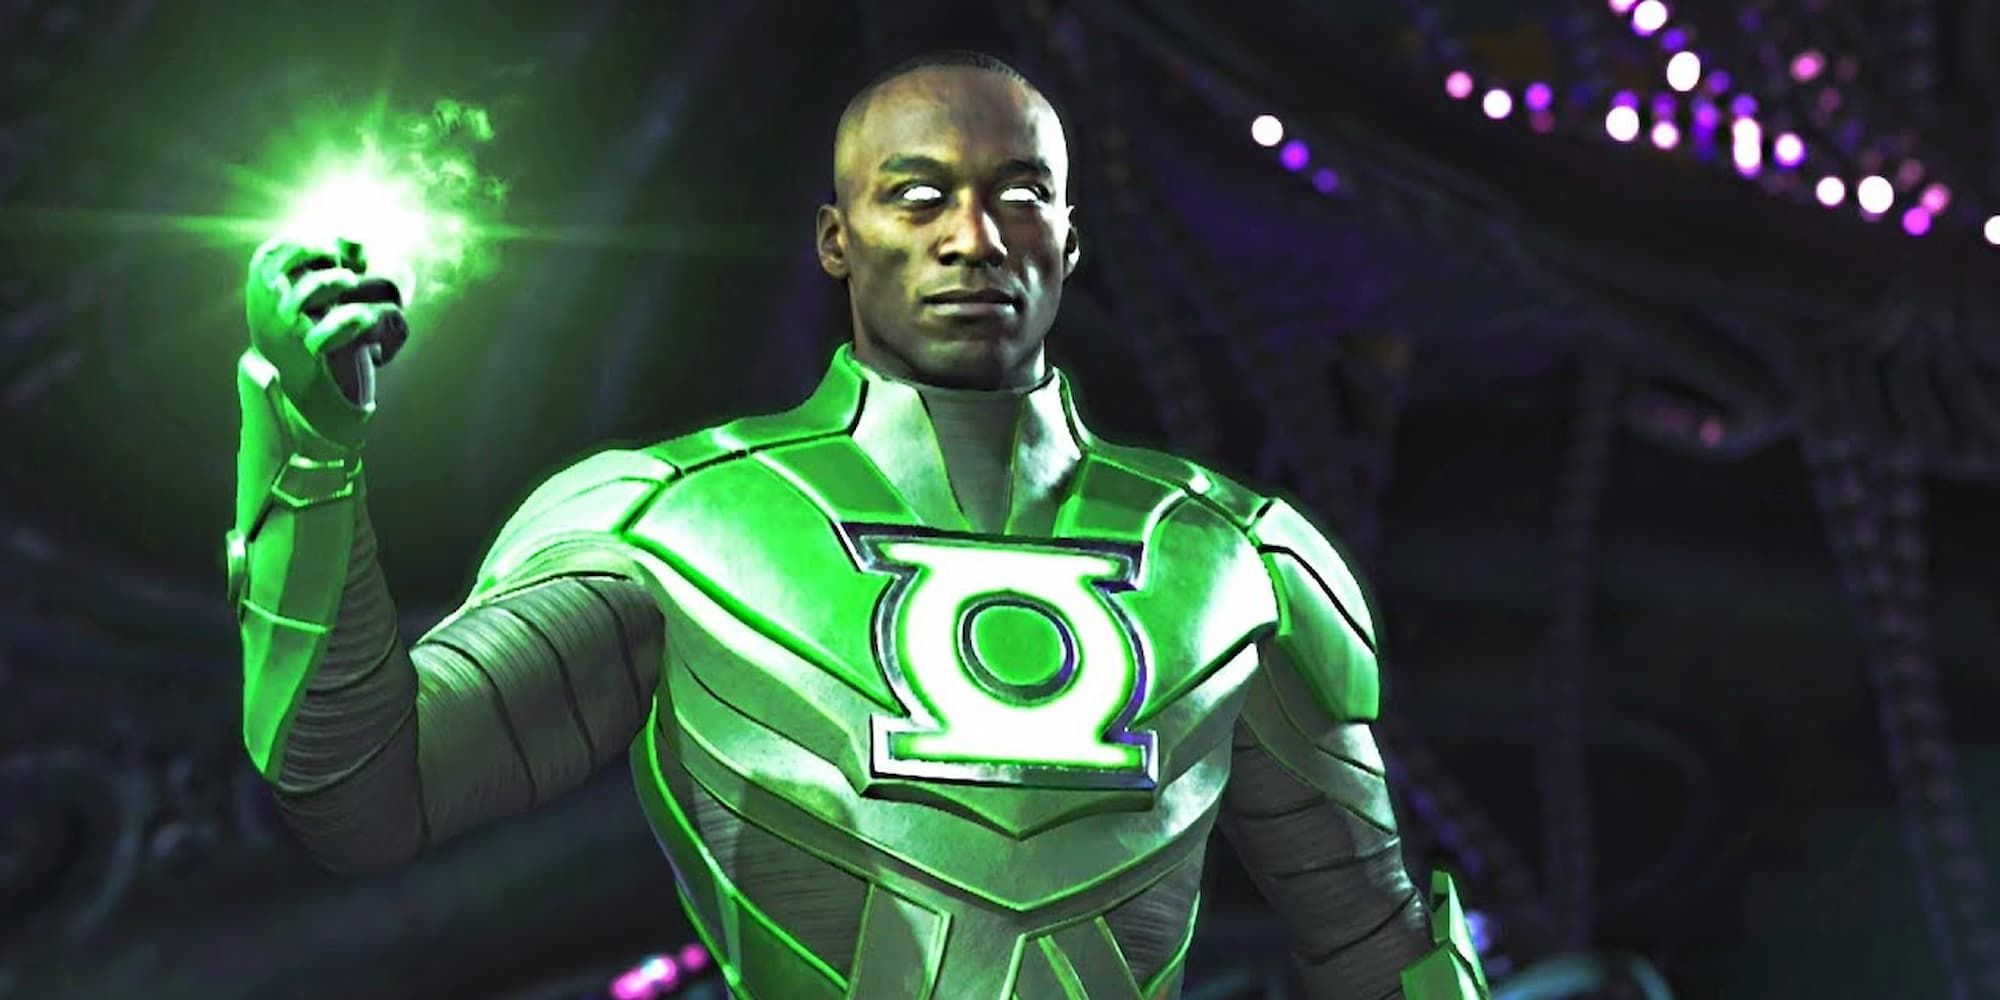 John Stewart stands tall while illuminating the light from his power ring.